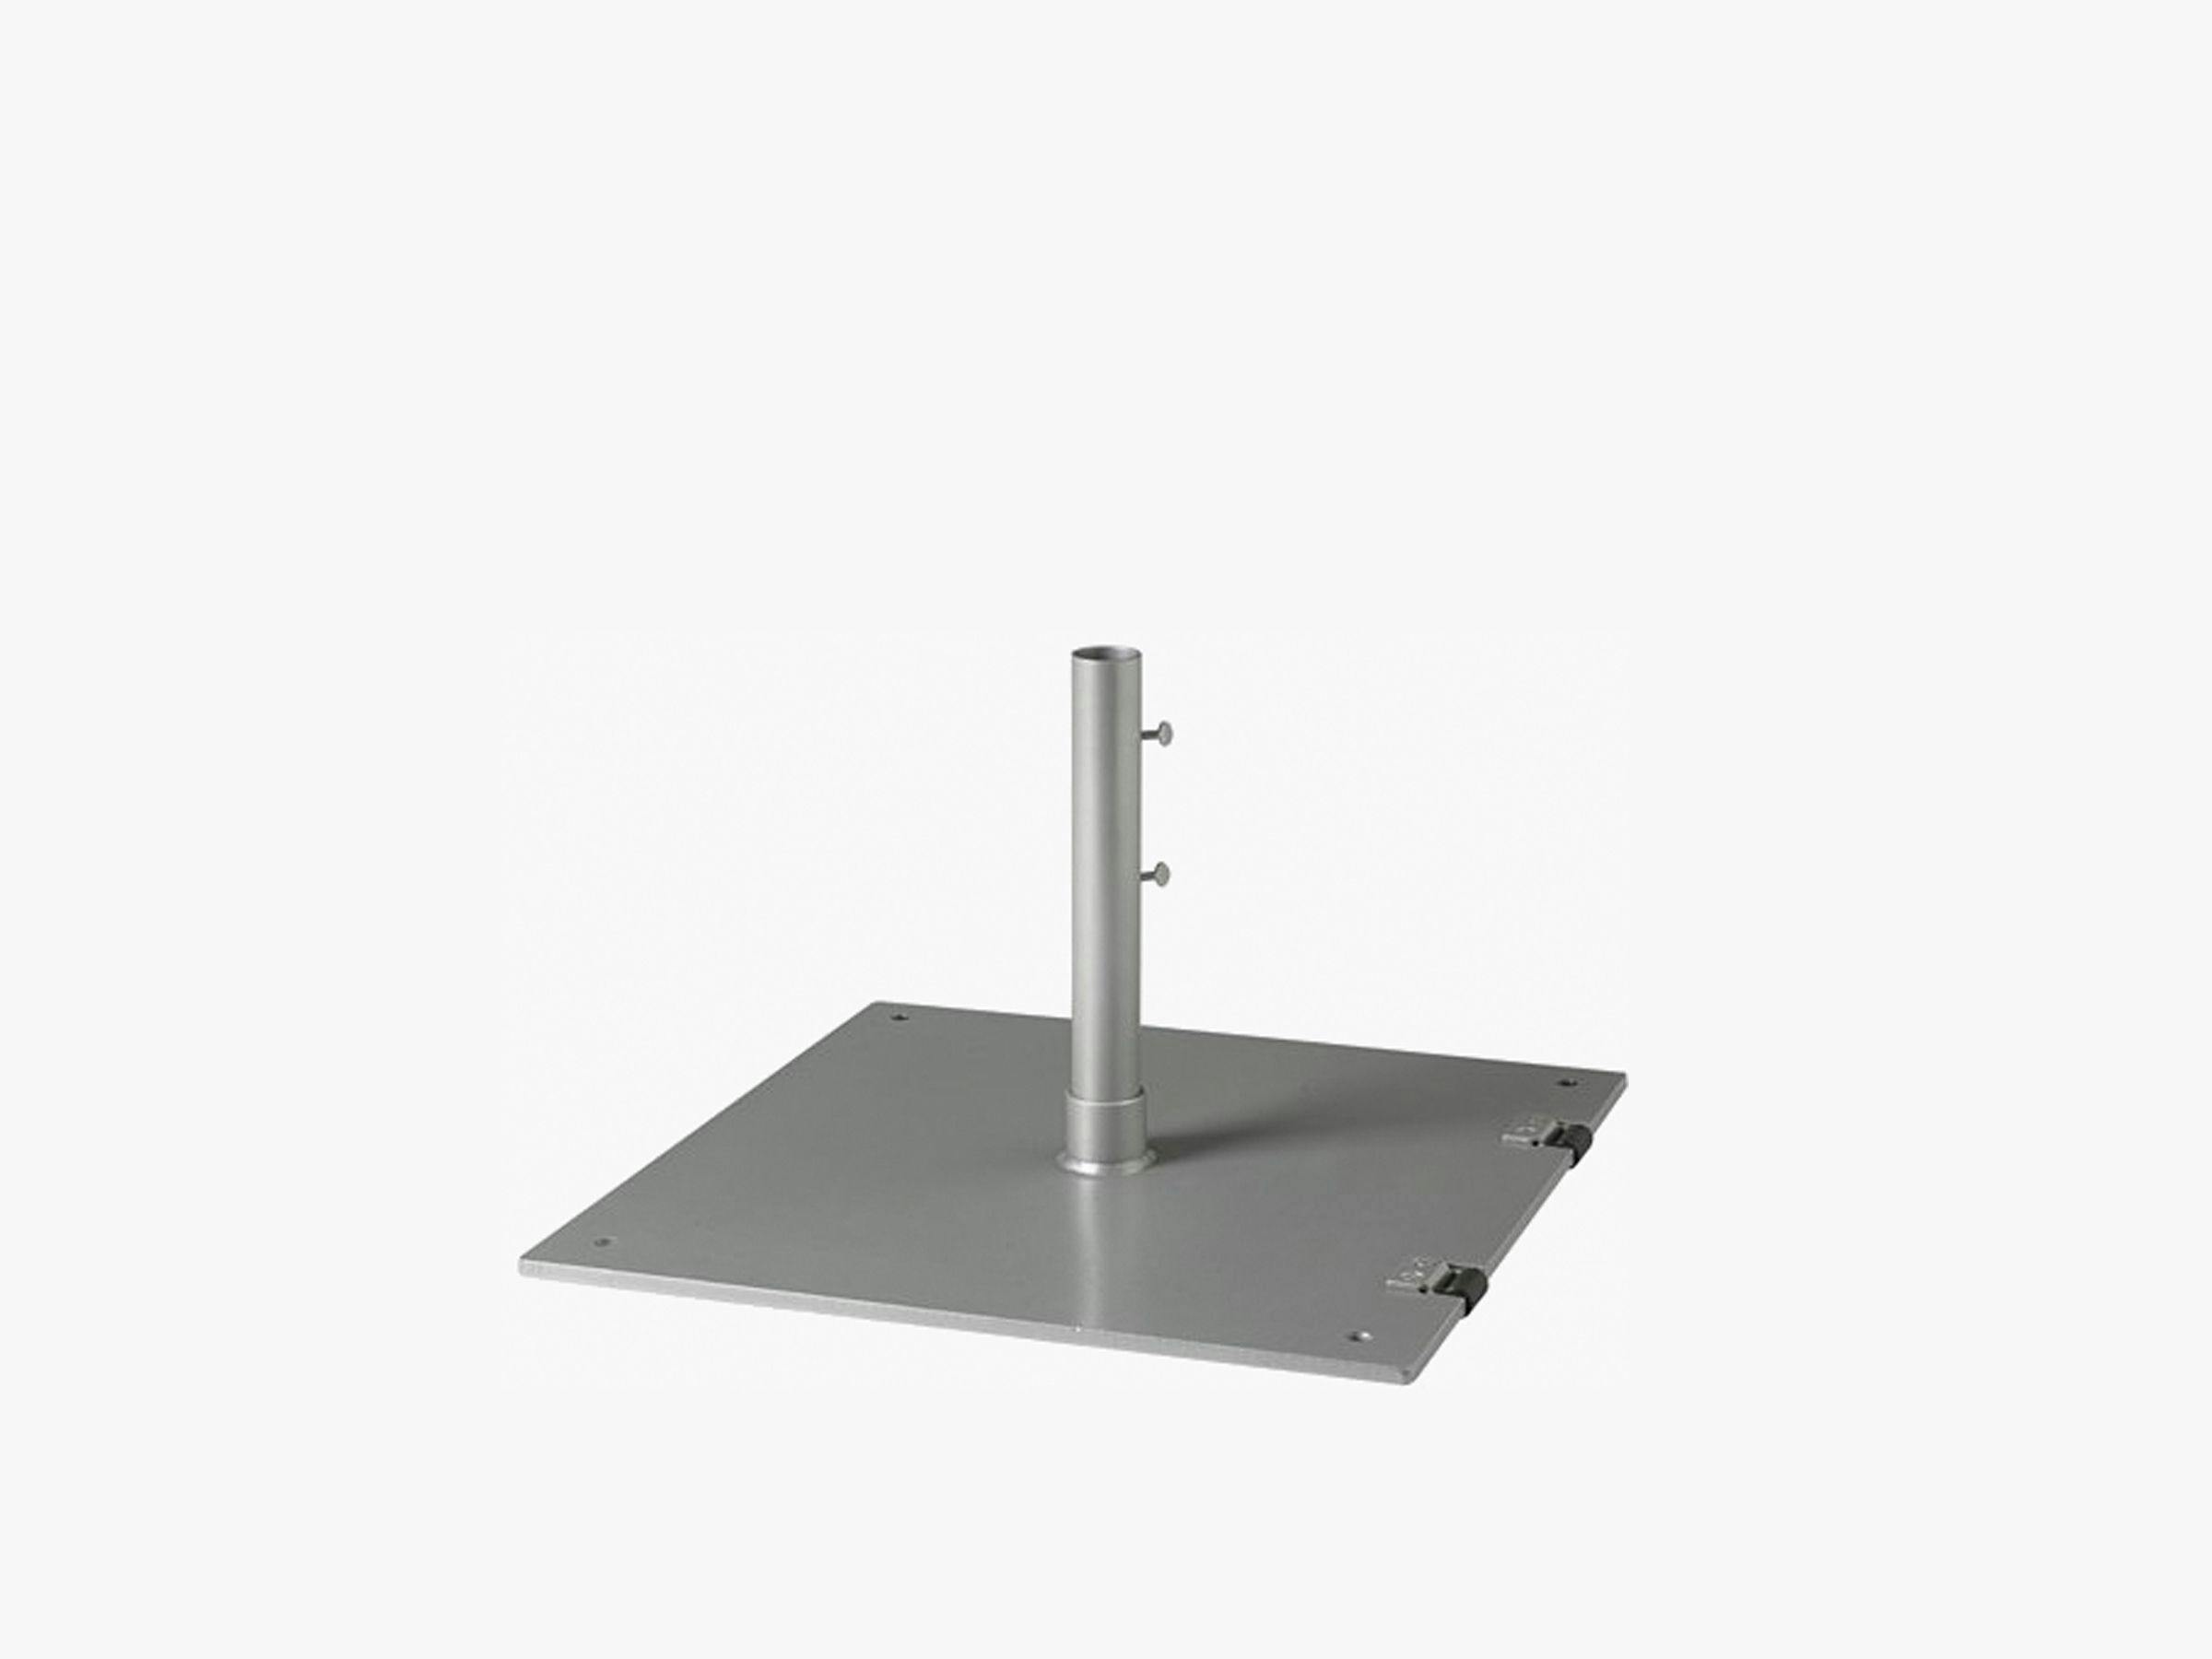 Steel Plate Base, 24" Square, Fits 2" Pole